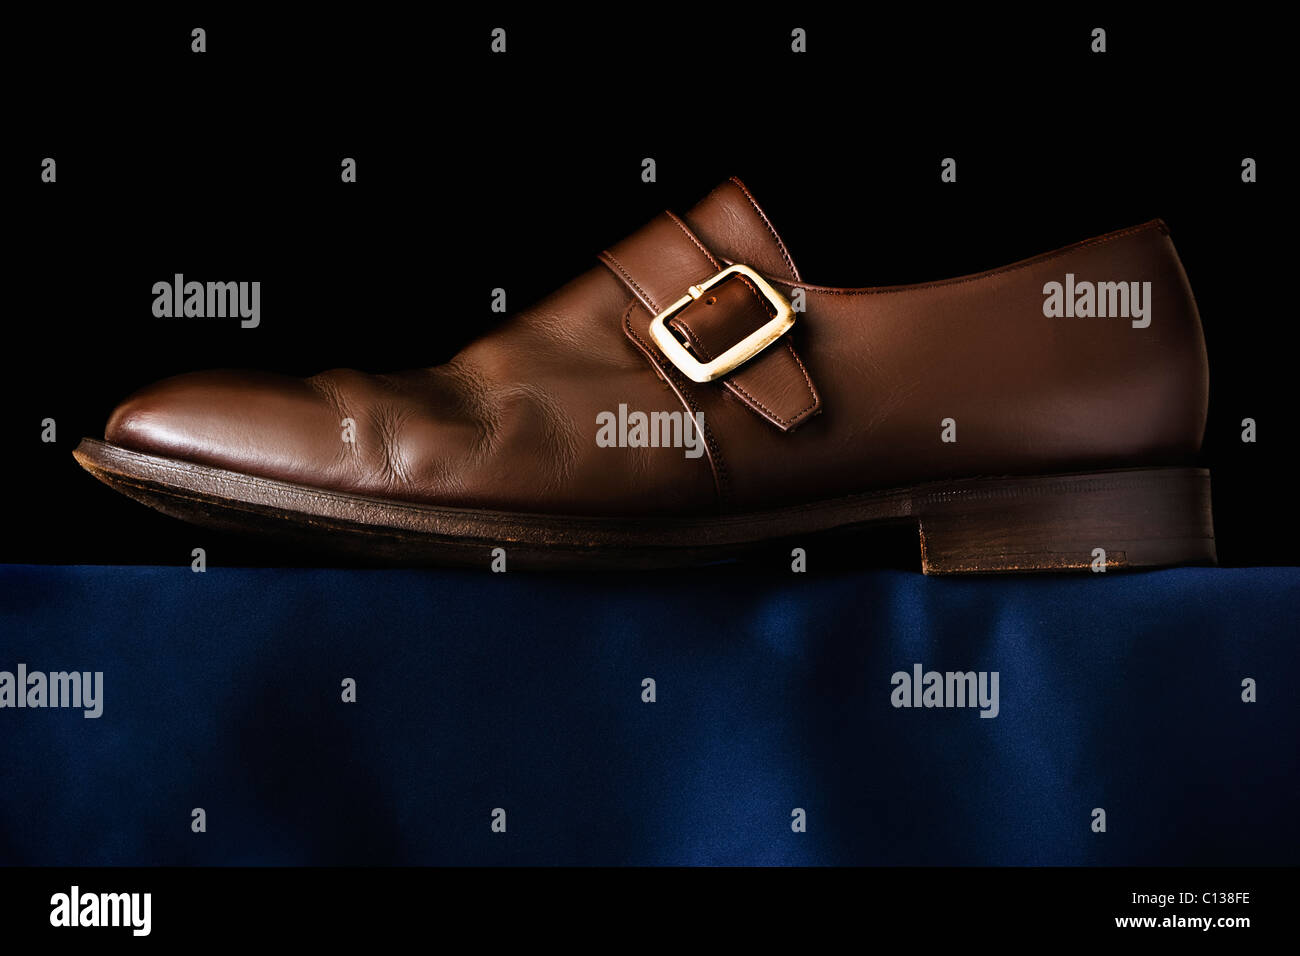 Traditional Buckle shoe on black background Stock Photo